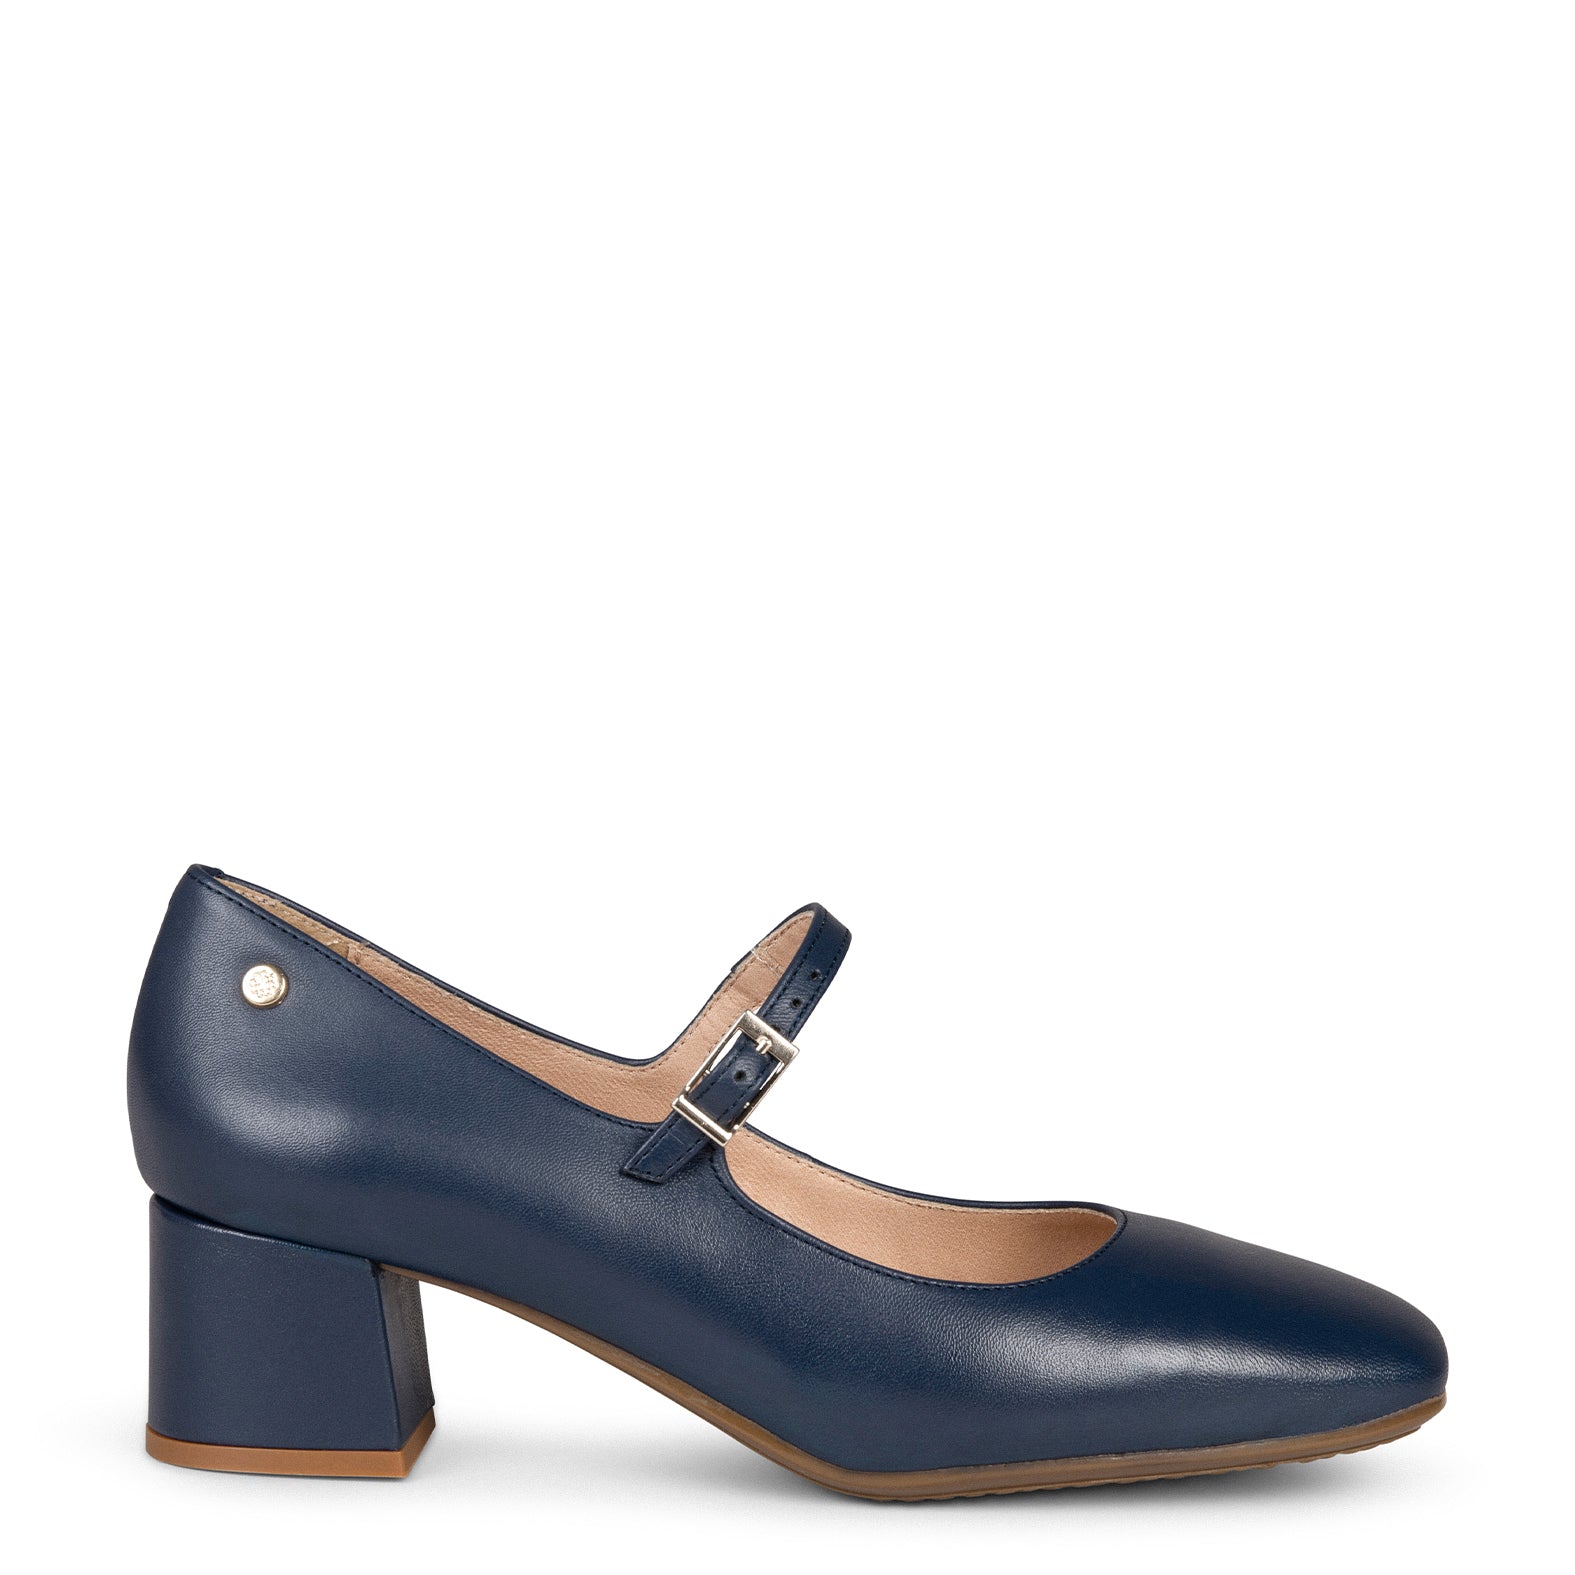 BELLA – NAVY suede leather mary-jane shoes